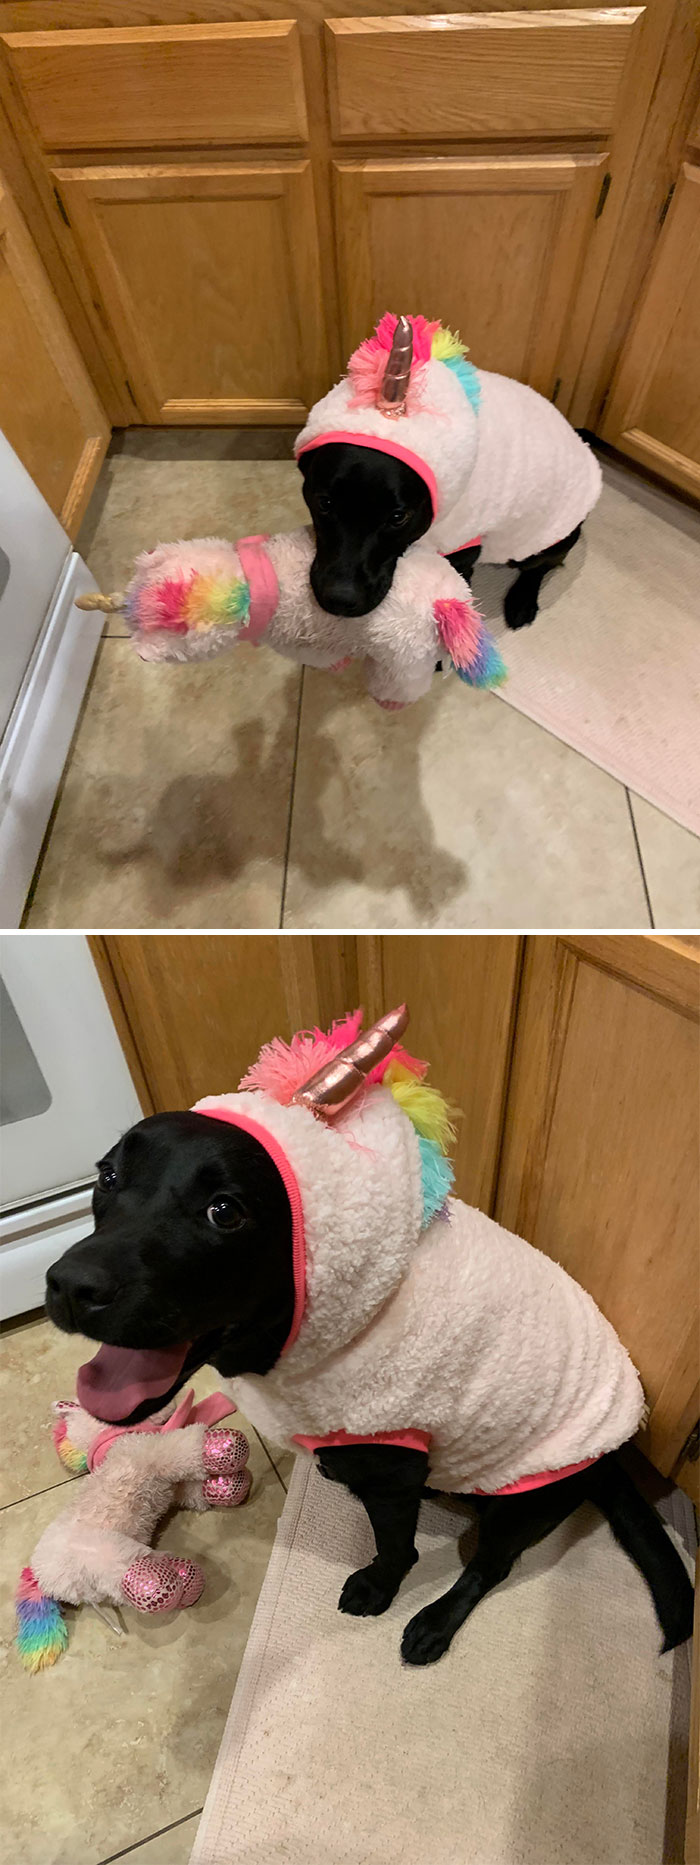 I Present To You My Lil Chönk. She Is Dressed Up As Her Favorite Toy. She Loves You